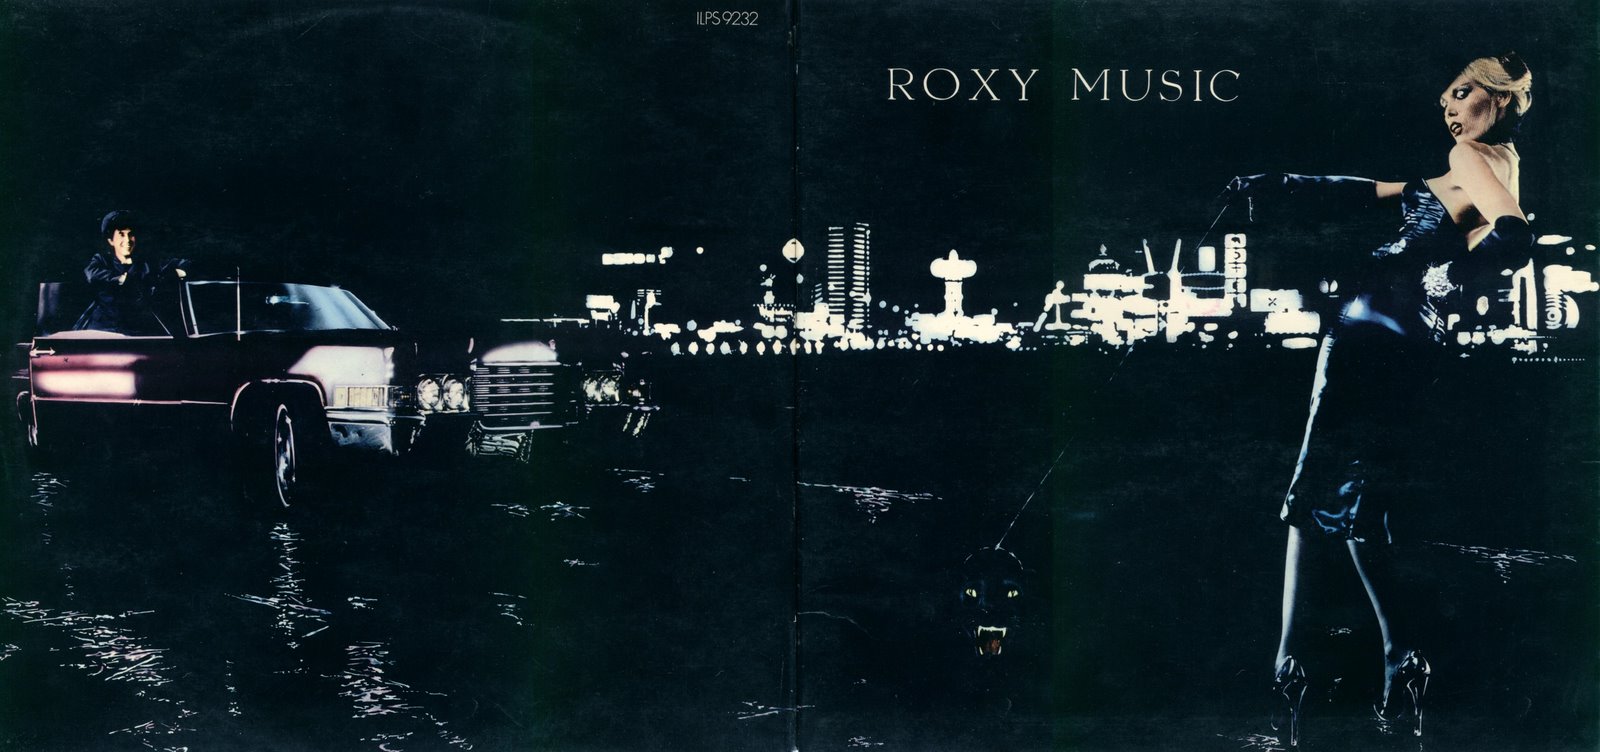 roxy-music-for-your-pleasure-cover.jpg